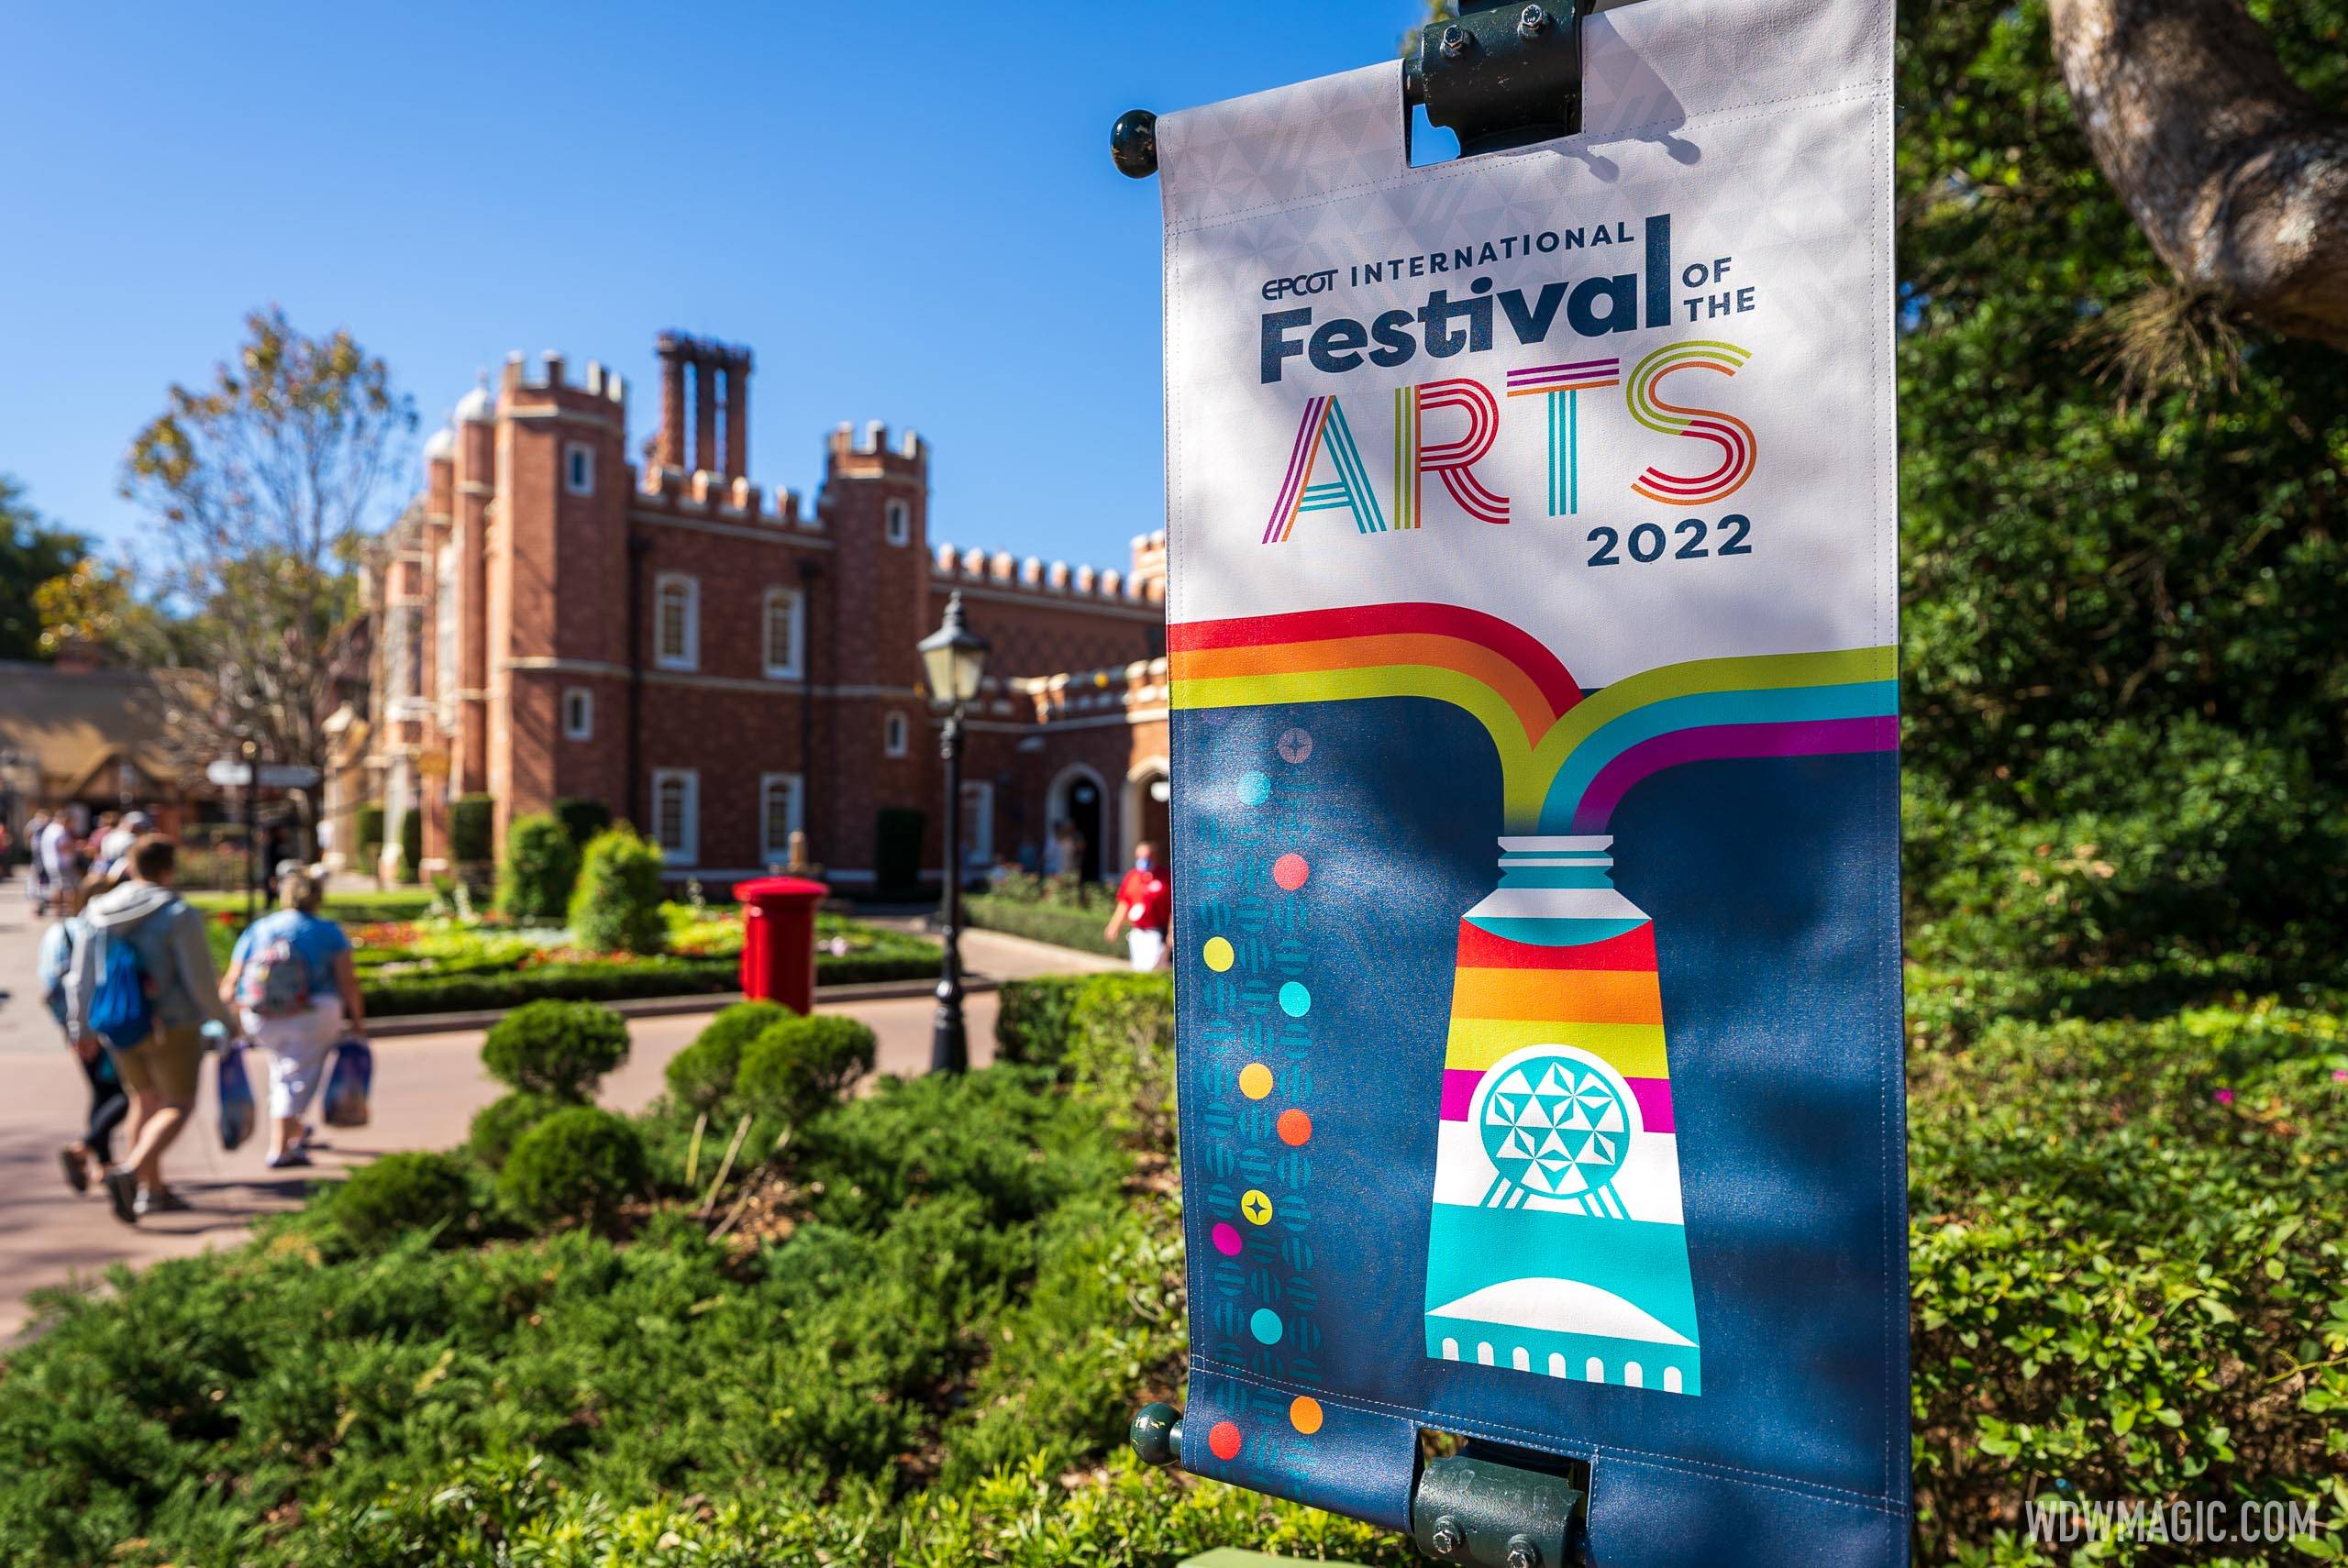 First details announced for the 2023 EPCOT International Festival of the Arts